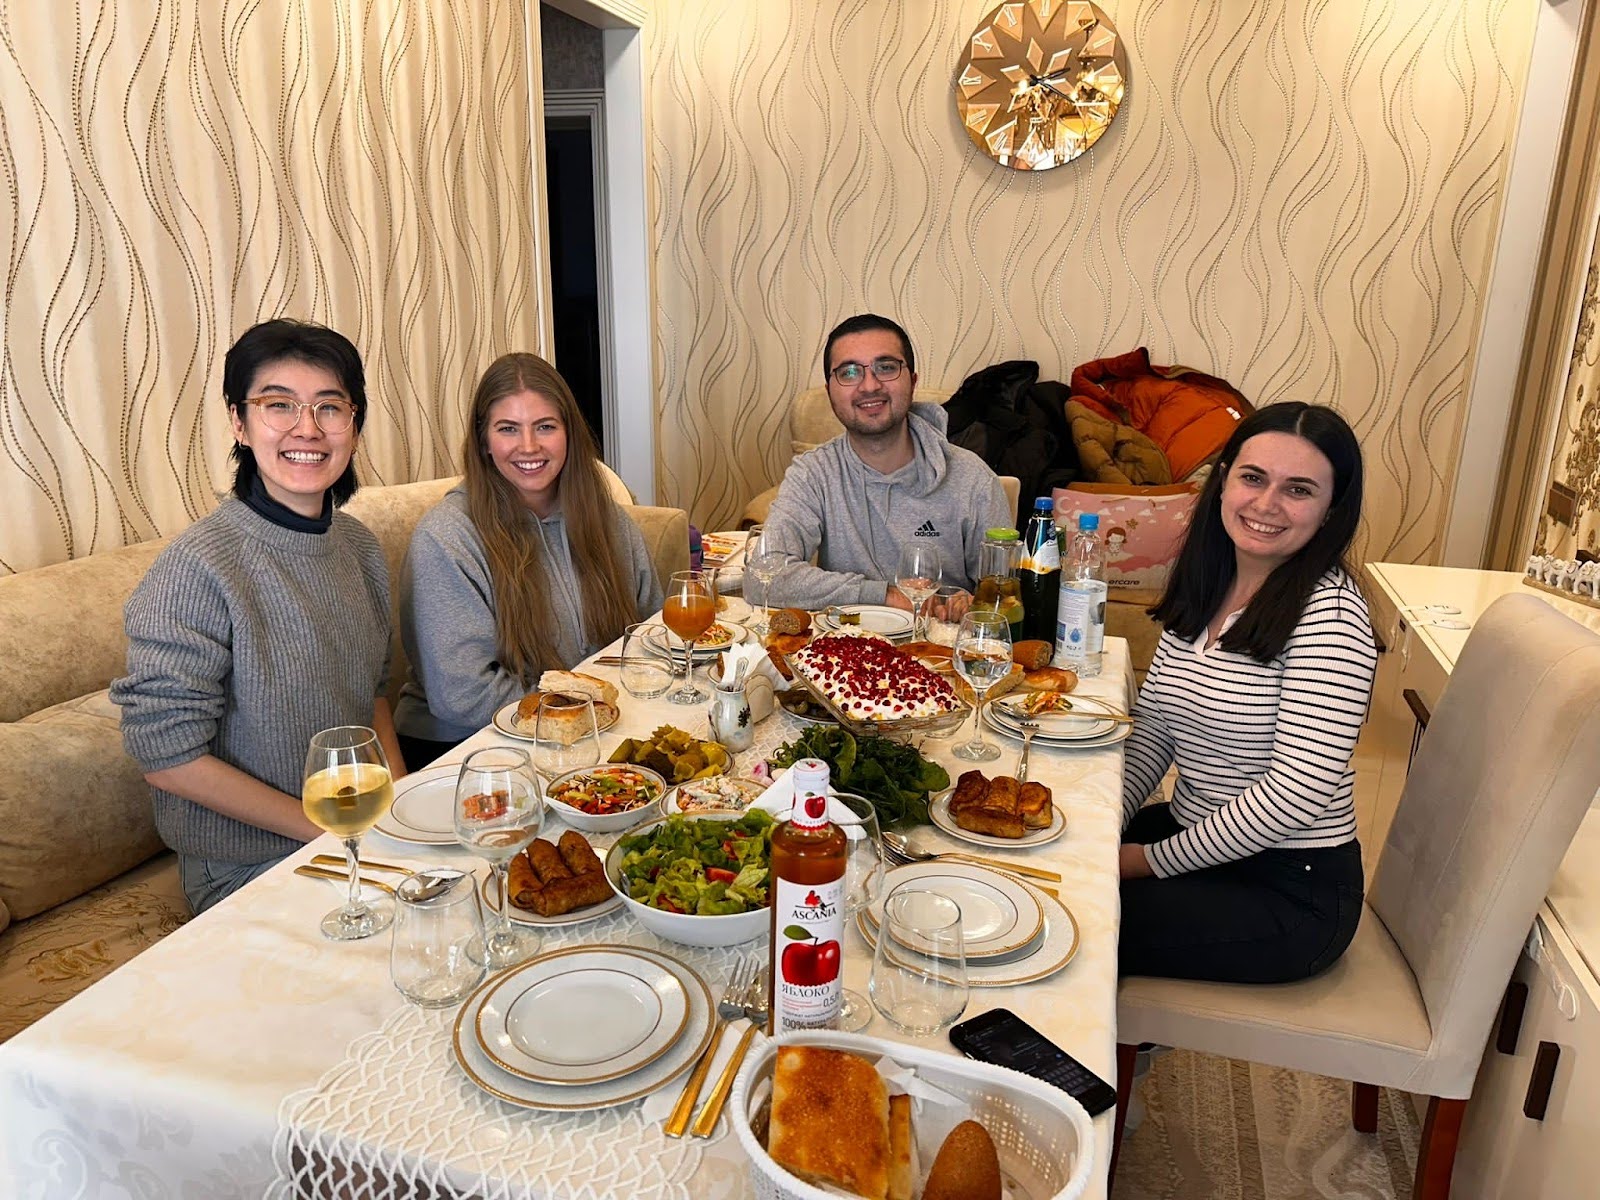 Juyoung, Sydney, Elmir, and Elmir’s wife Samira at a traditional Azerbaijani lunch in Samira’s family home.